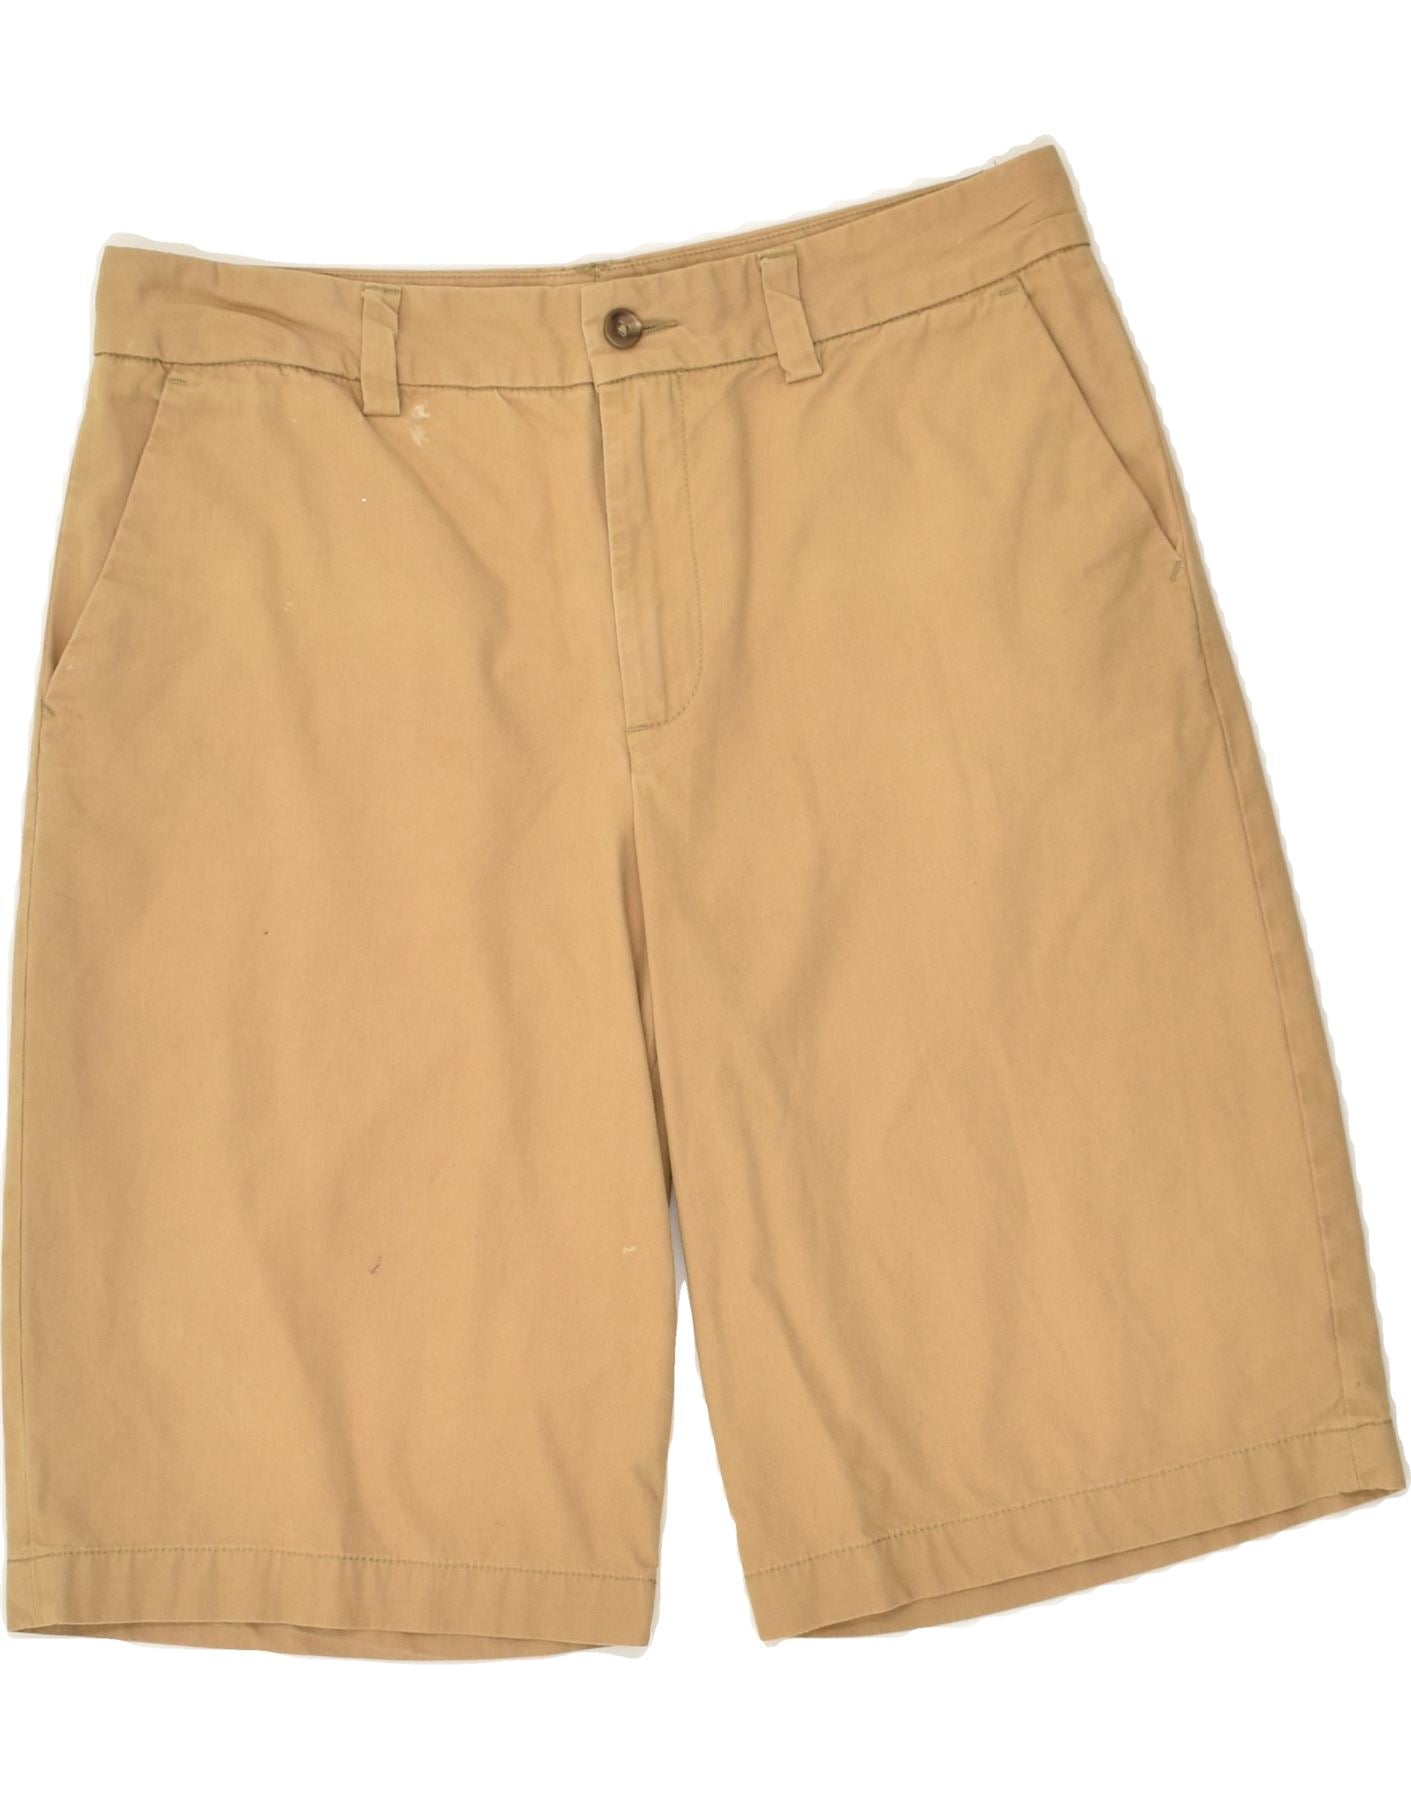 POLO RALPH LAUREN Boys Chino Shorts 15-16 Years W28 Beige Cotton, Vintage  & Second-Hand Clothing Online